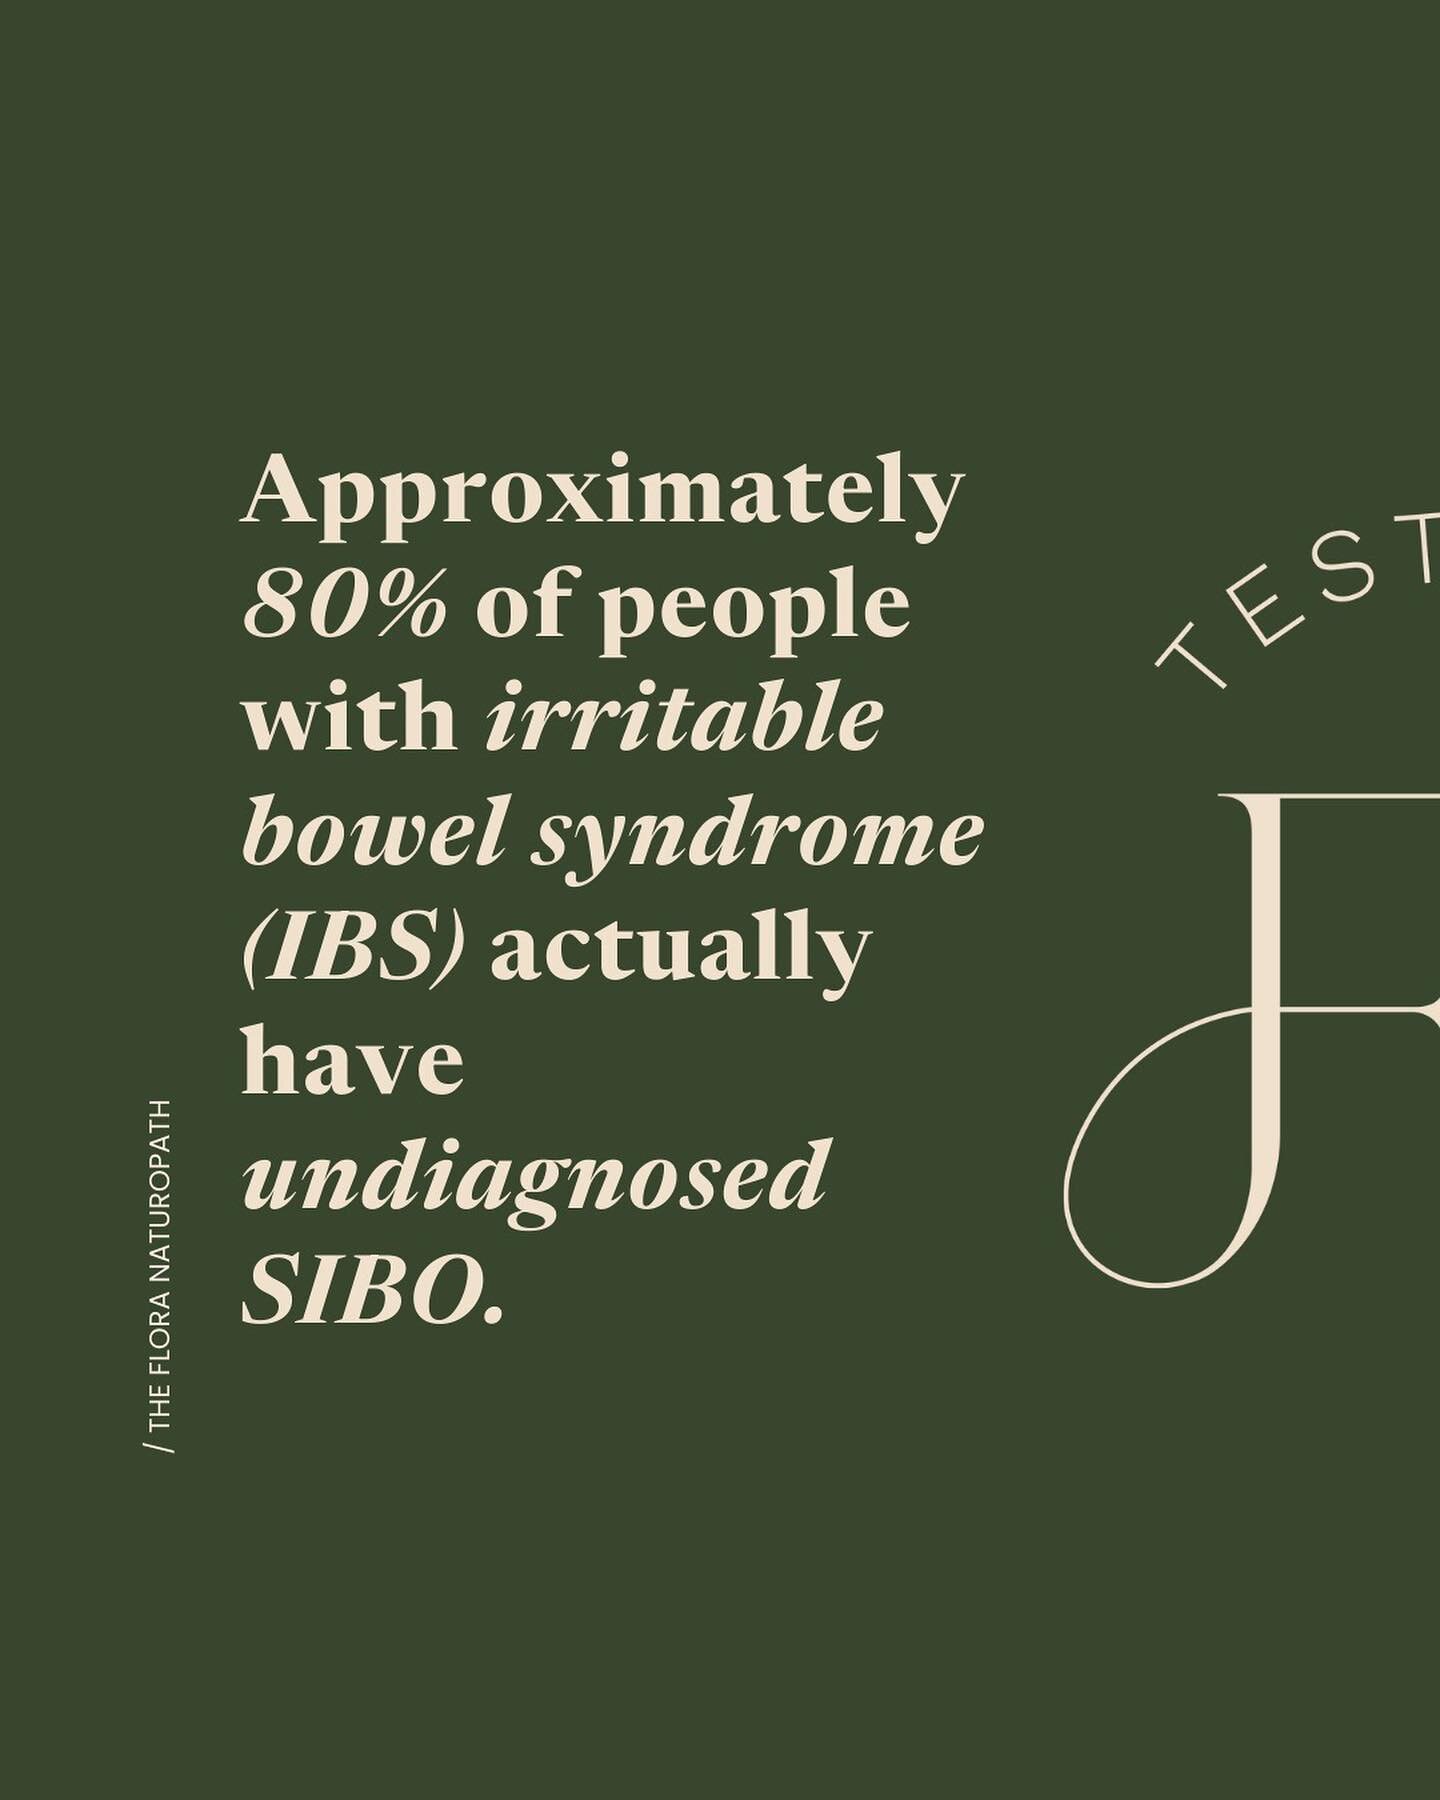 Are you experiencing these type of symptoms?  Let&rsquo;s get to the bottom of it.  We offer the SIBO Breath Test here at TFN. 
.
We find this test invaluable alongside the microbiome mapping test to gain a comprehensive understanding of what&rsquo;s